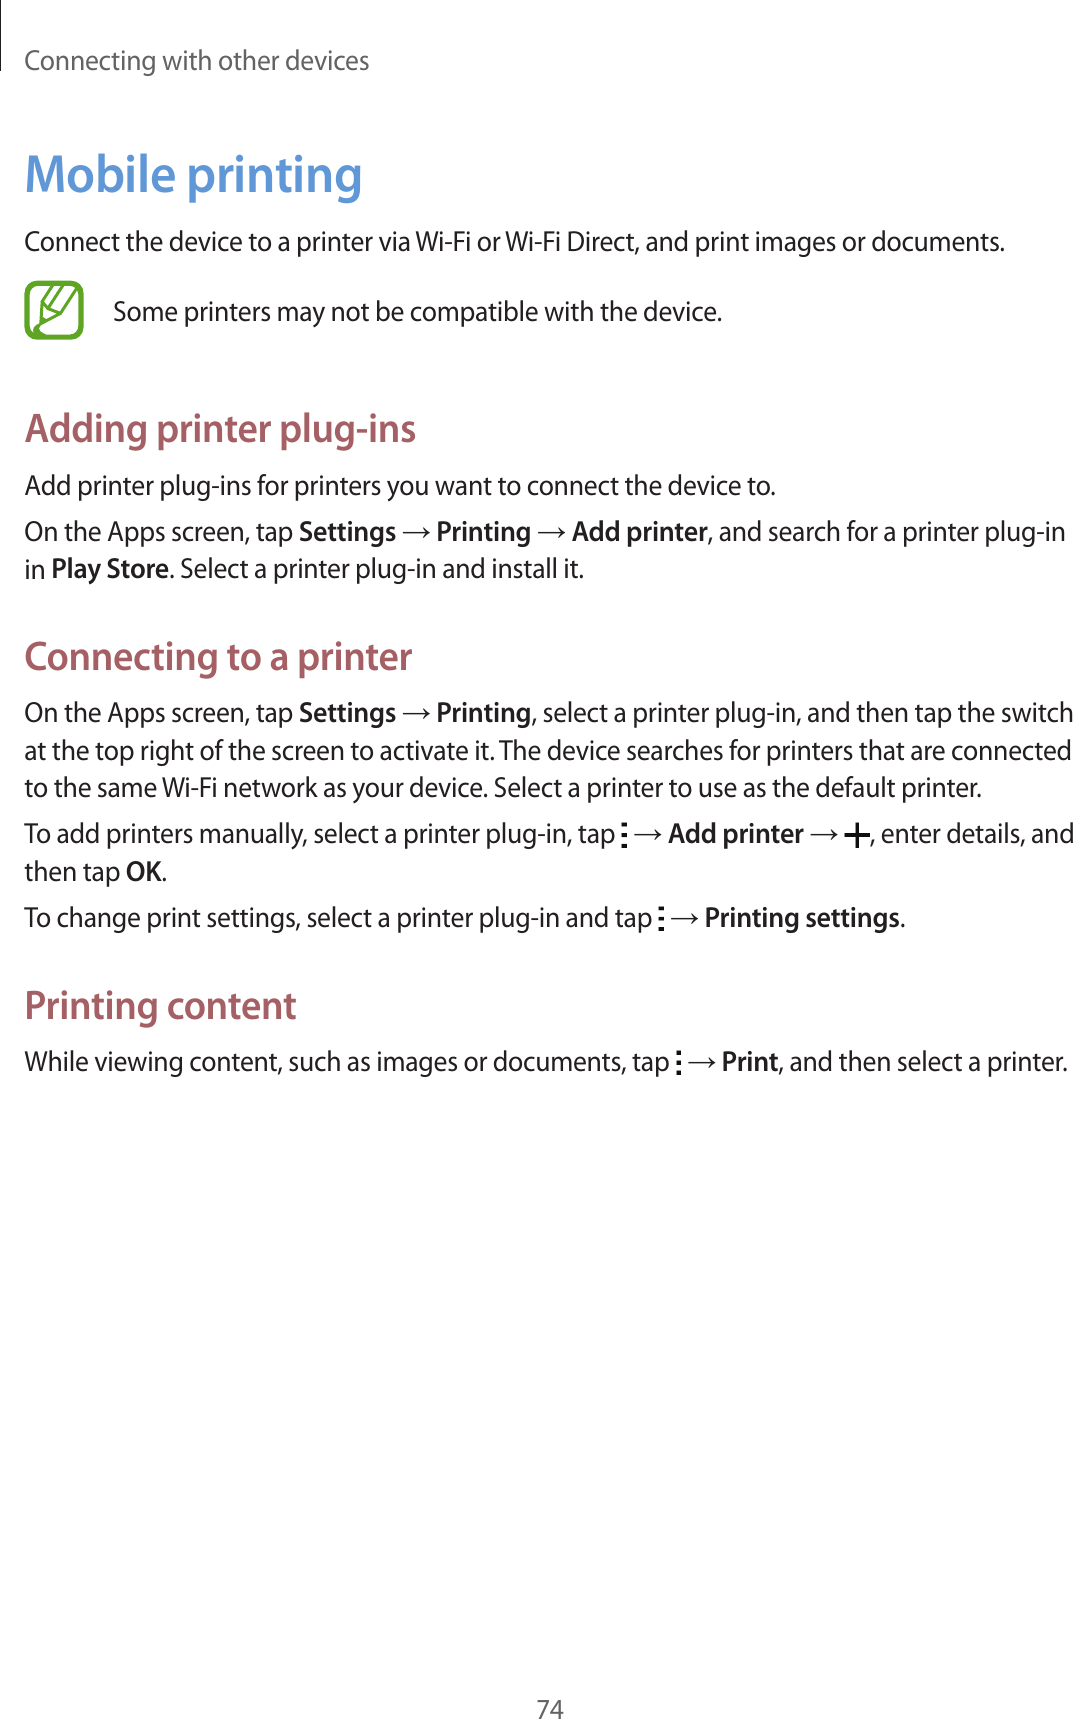 Connecting with other devices74Mobile printingConnect the device to a printer via Wi-Fi or Wi-Fi Direct, and print images or documents.Some printers may not be compatible with the device.Adding printer plug-insAdd printer plug-ins for printers you want to connect the device to.On the Apps screen, tap Settings → Printing → Add printer, and search for a printer plug-in in Play Store. Select a printer plug-in and install it.Connecting to a printerOn the Apps screen, tap Settings → Printing, select a printer plug-in, and then tap the switch at the top right of the screen to activate it. The device searches for printers that are connected to the same Wi-Fi network as your device. Select a printer to use as the default printer.To add printers manually, select a printer plug-in, tap   → Add printer → , enter details, and then tap OK.To change print settings, select a printer plug-in and tap   → Printing settings.Printing contentWhile viewing content, such as images or documents, tap   → Print, and then select a printer.